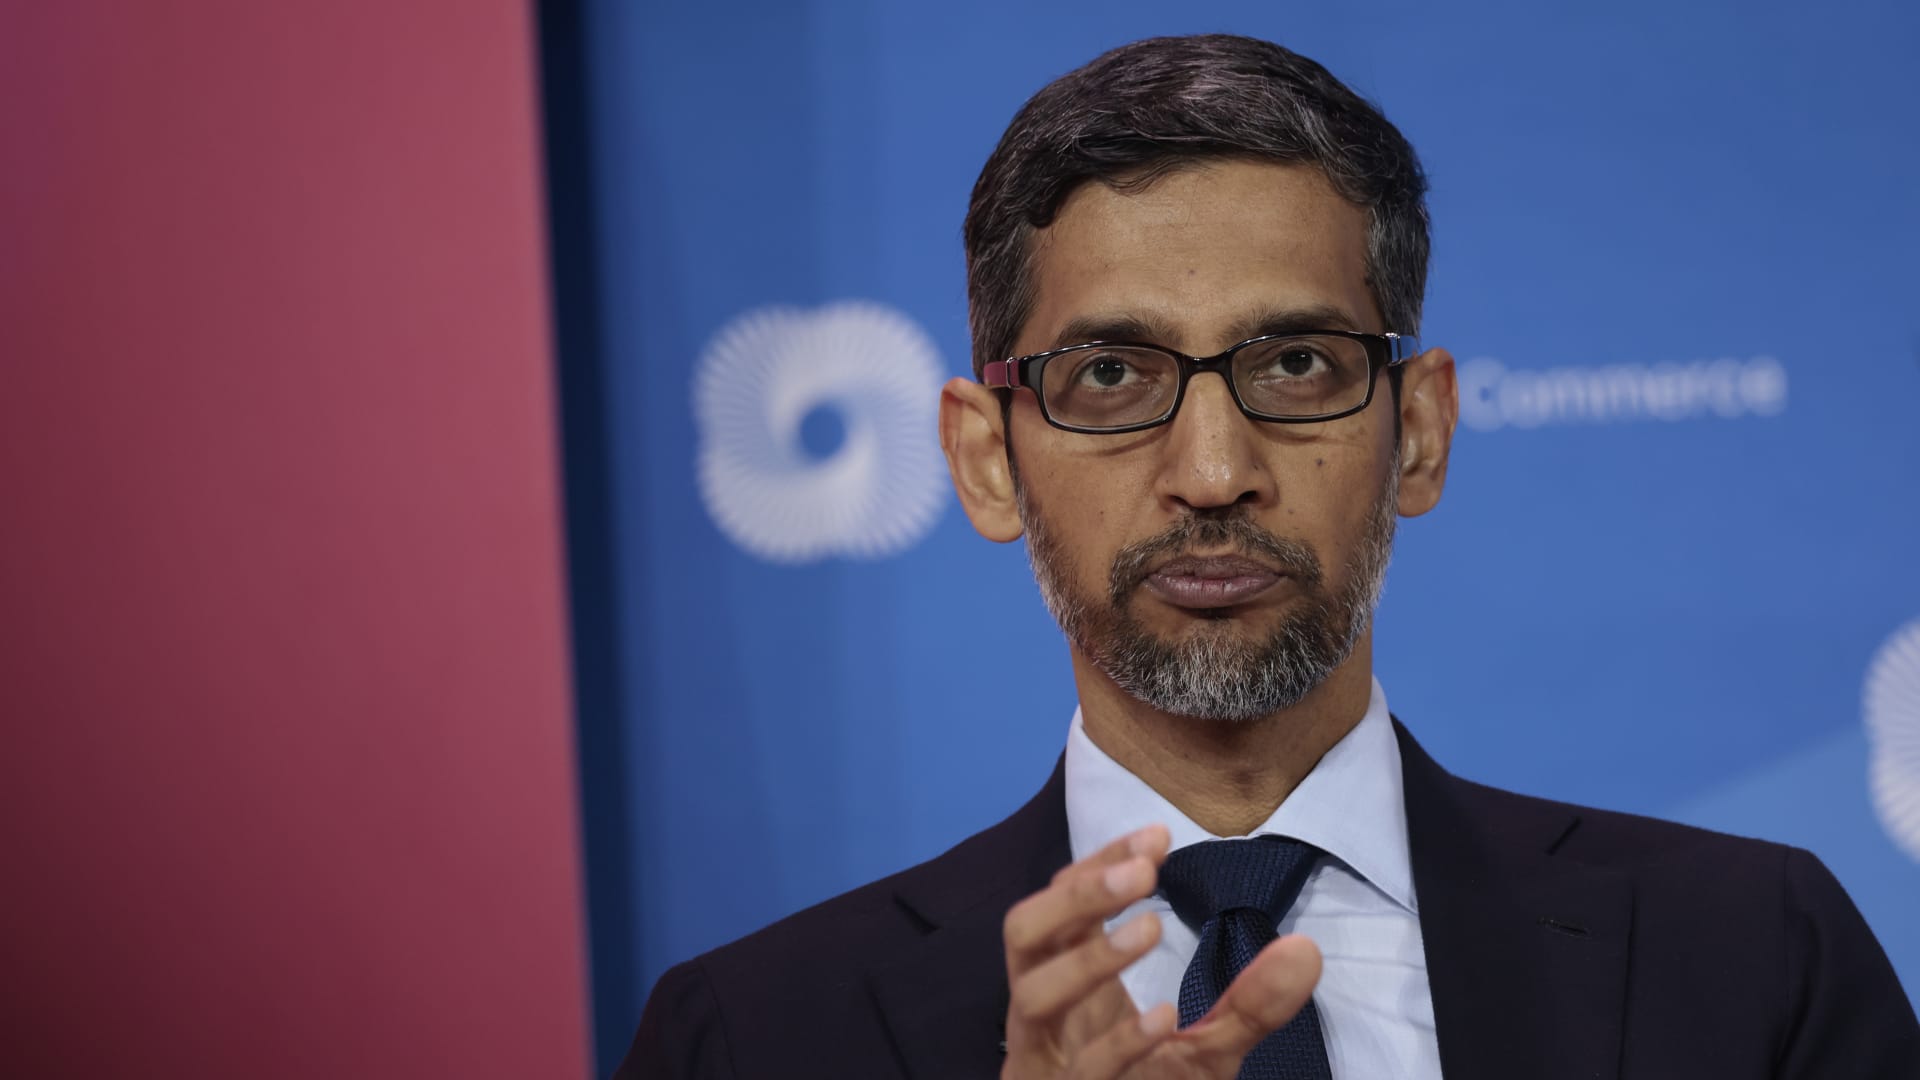 Google CEO Sundar Pichai speaks at a panel at the CEO Summit of the Americas hosted by the U.S. Chamber of Commerce in Los Angeles on June 9, 2022.